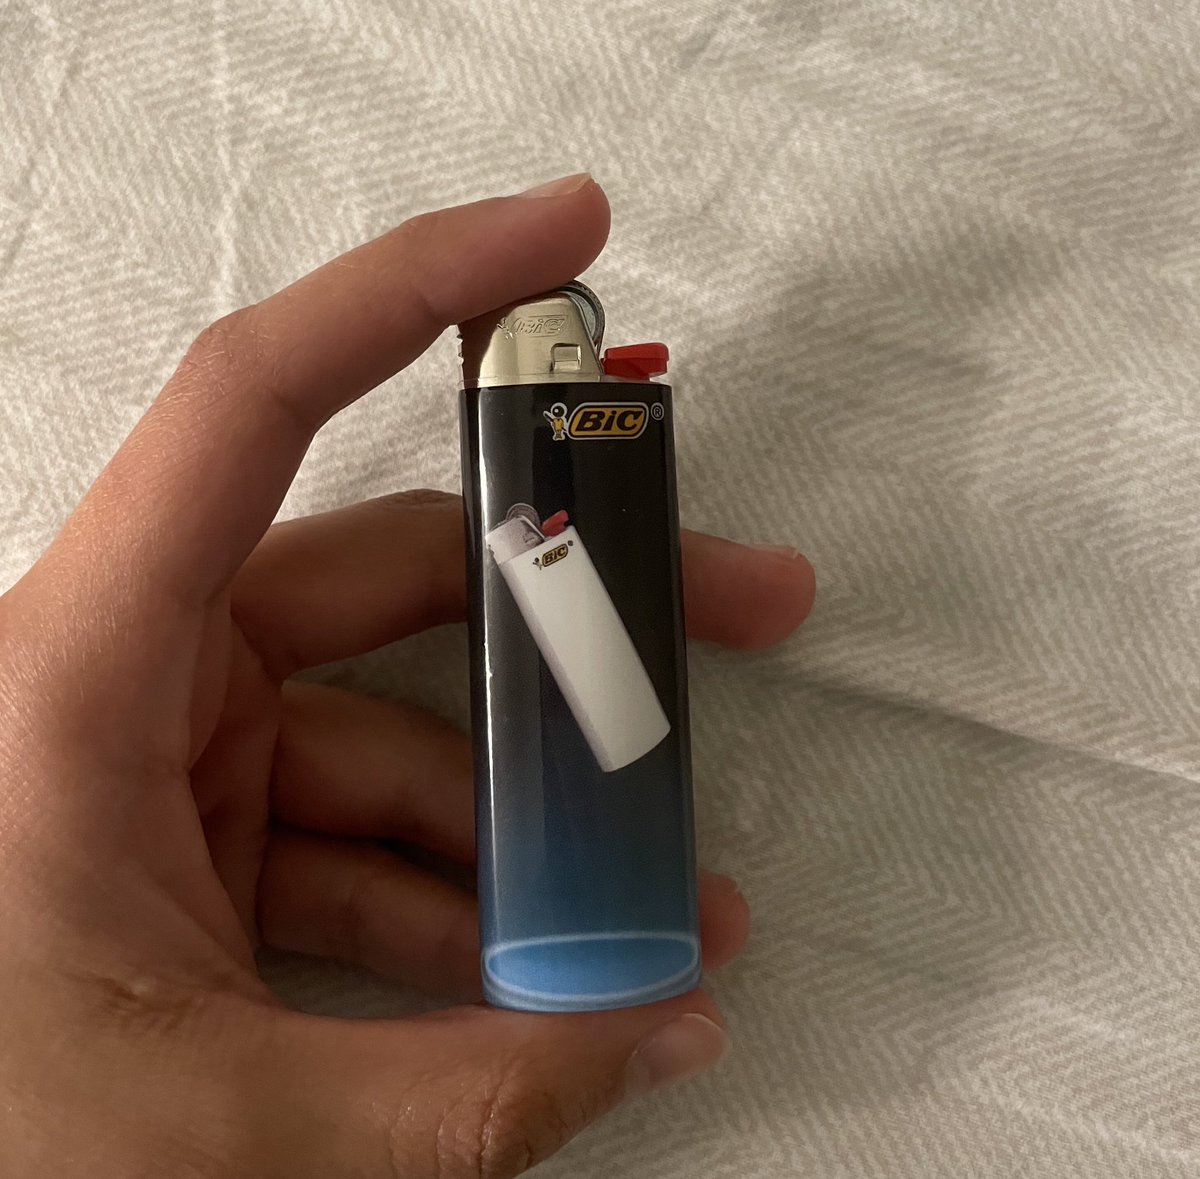 gf found this lighter at the gas station had to share